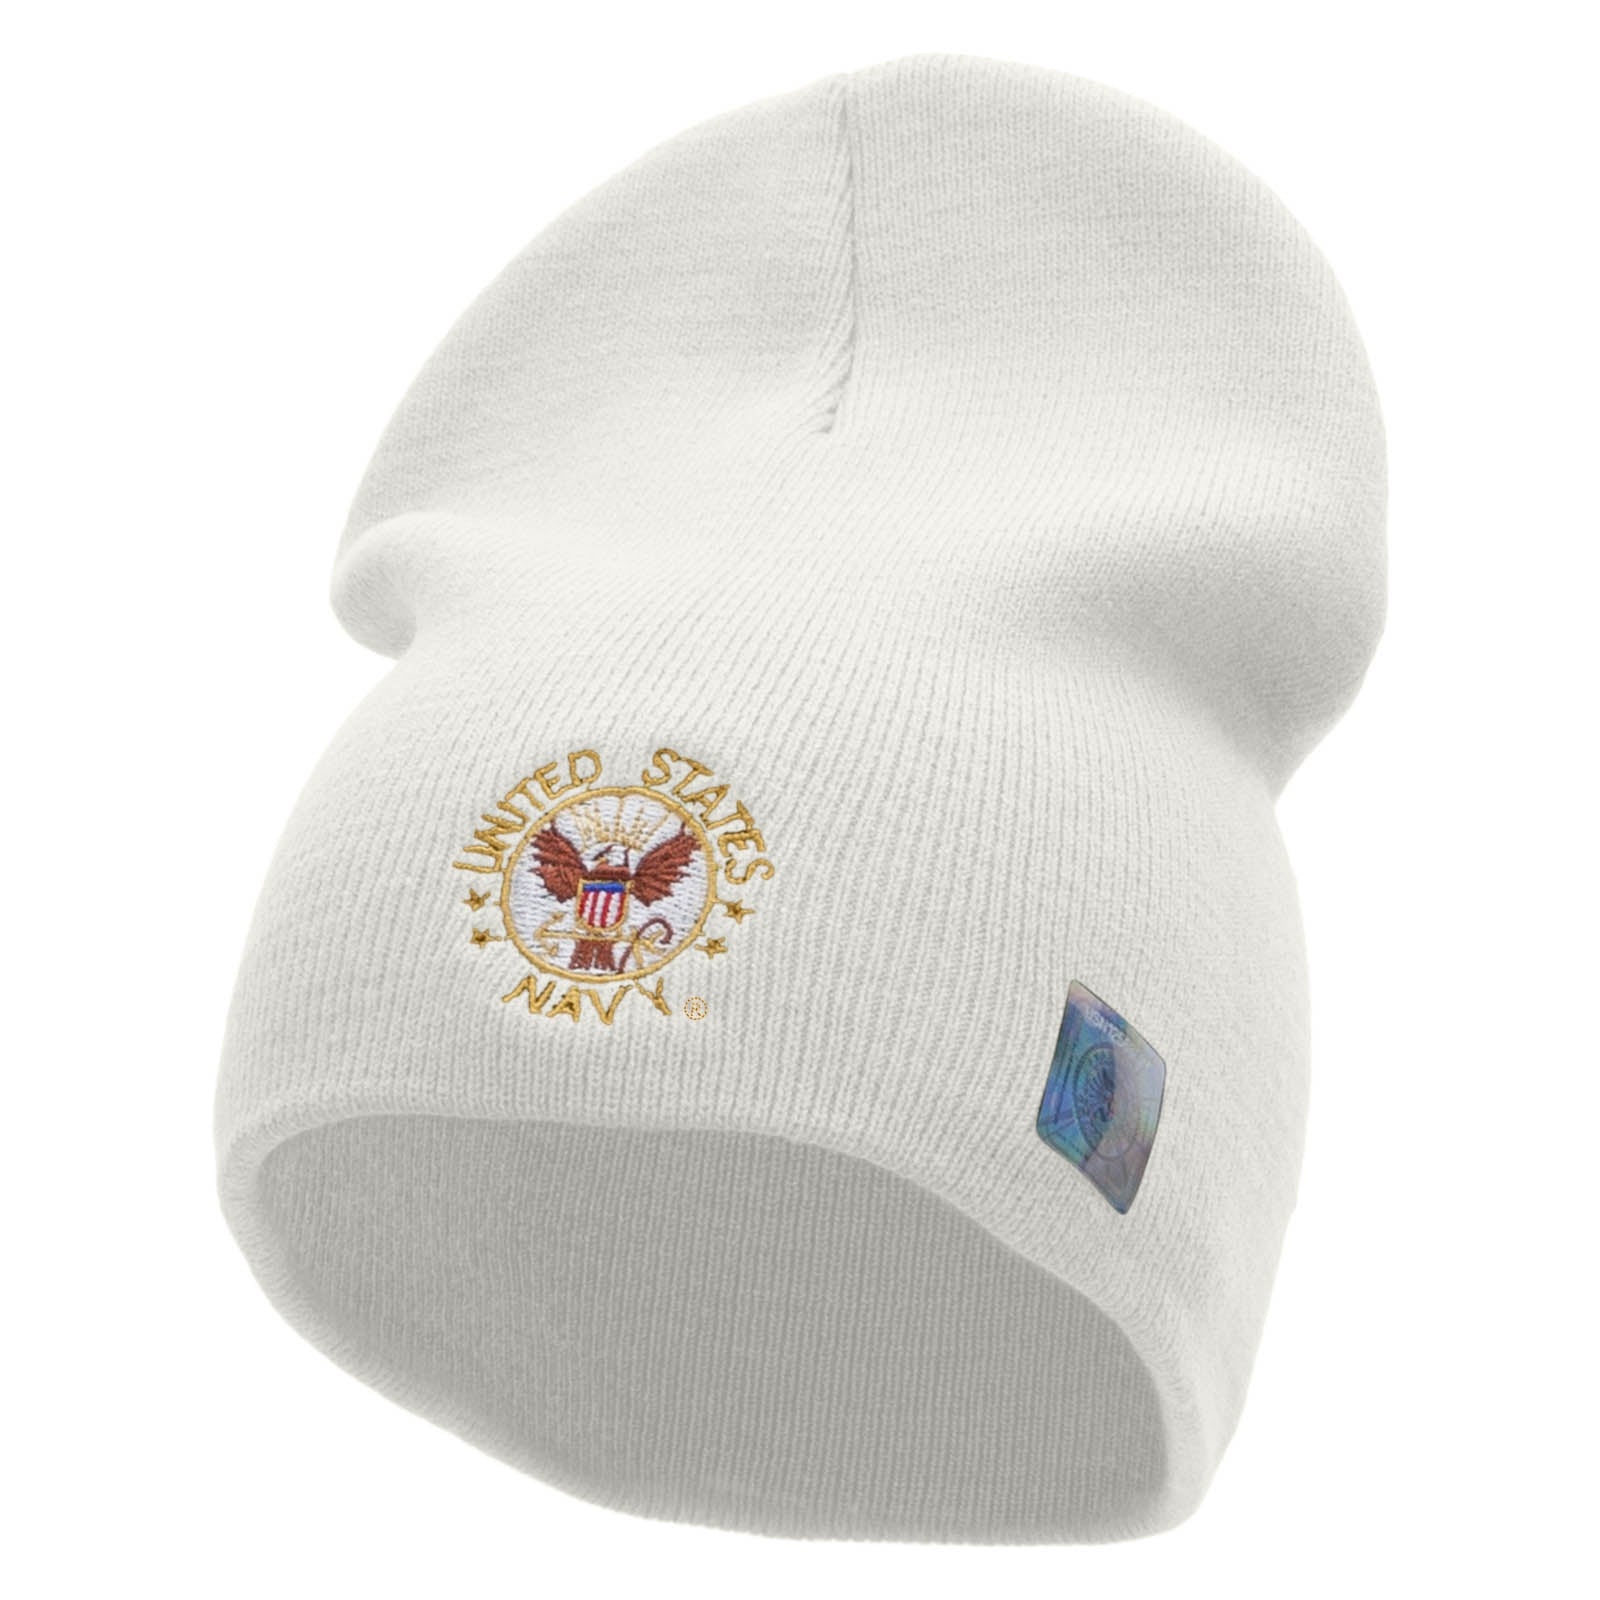 Licensed US Navy Circle Symbol Embroidered Short Beanie Made in USA - White OSFM